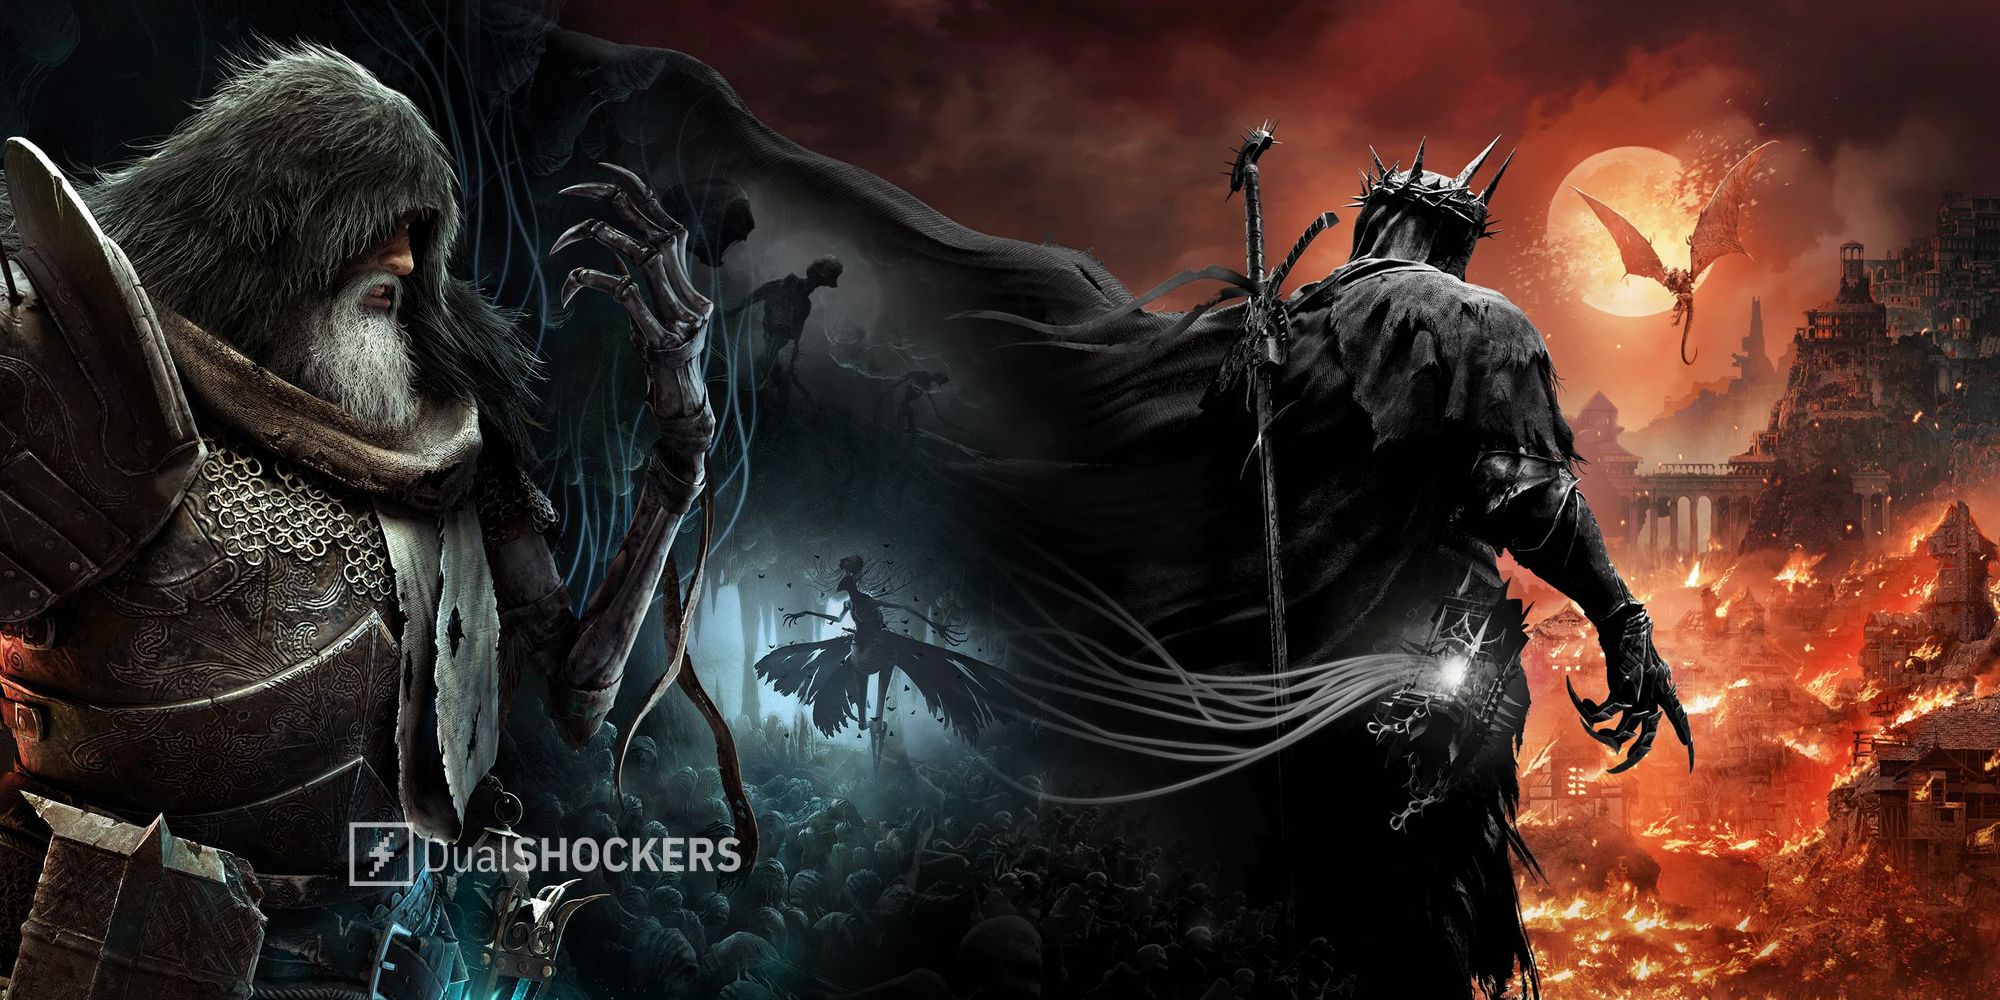 Lords Of The Fallen Release Date Announced